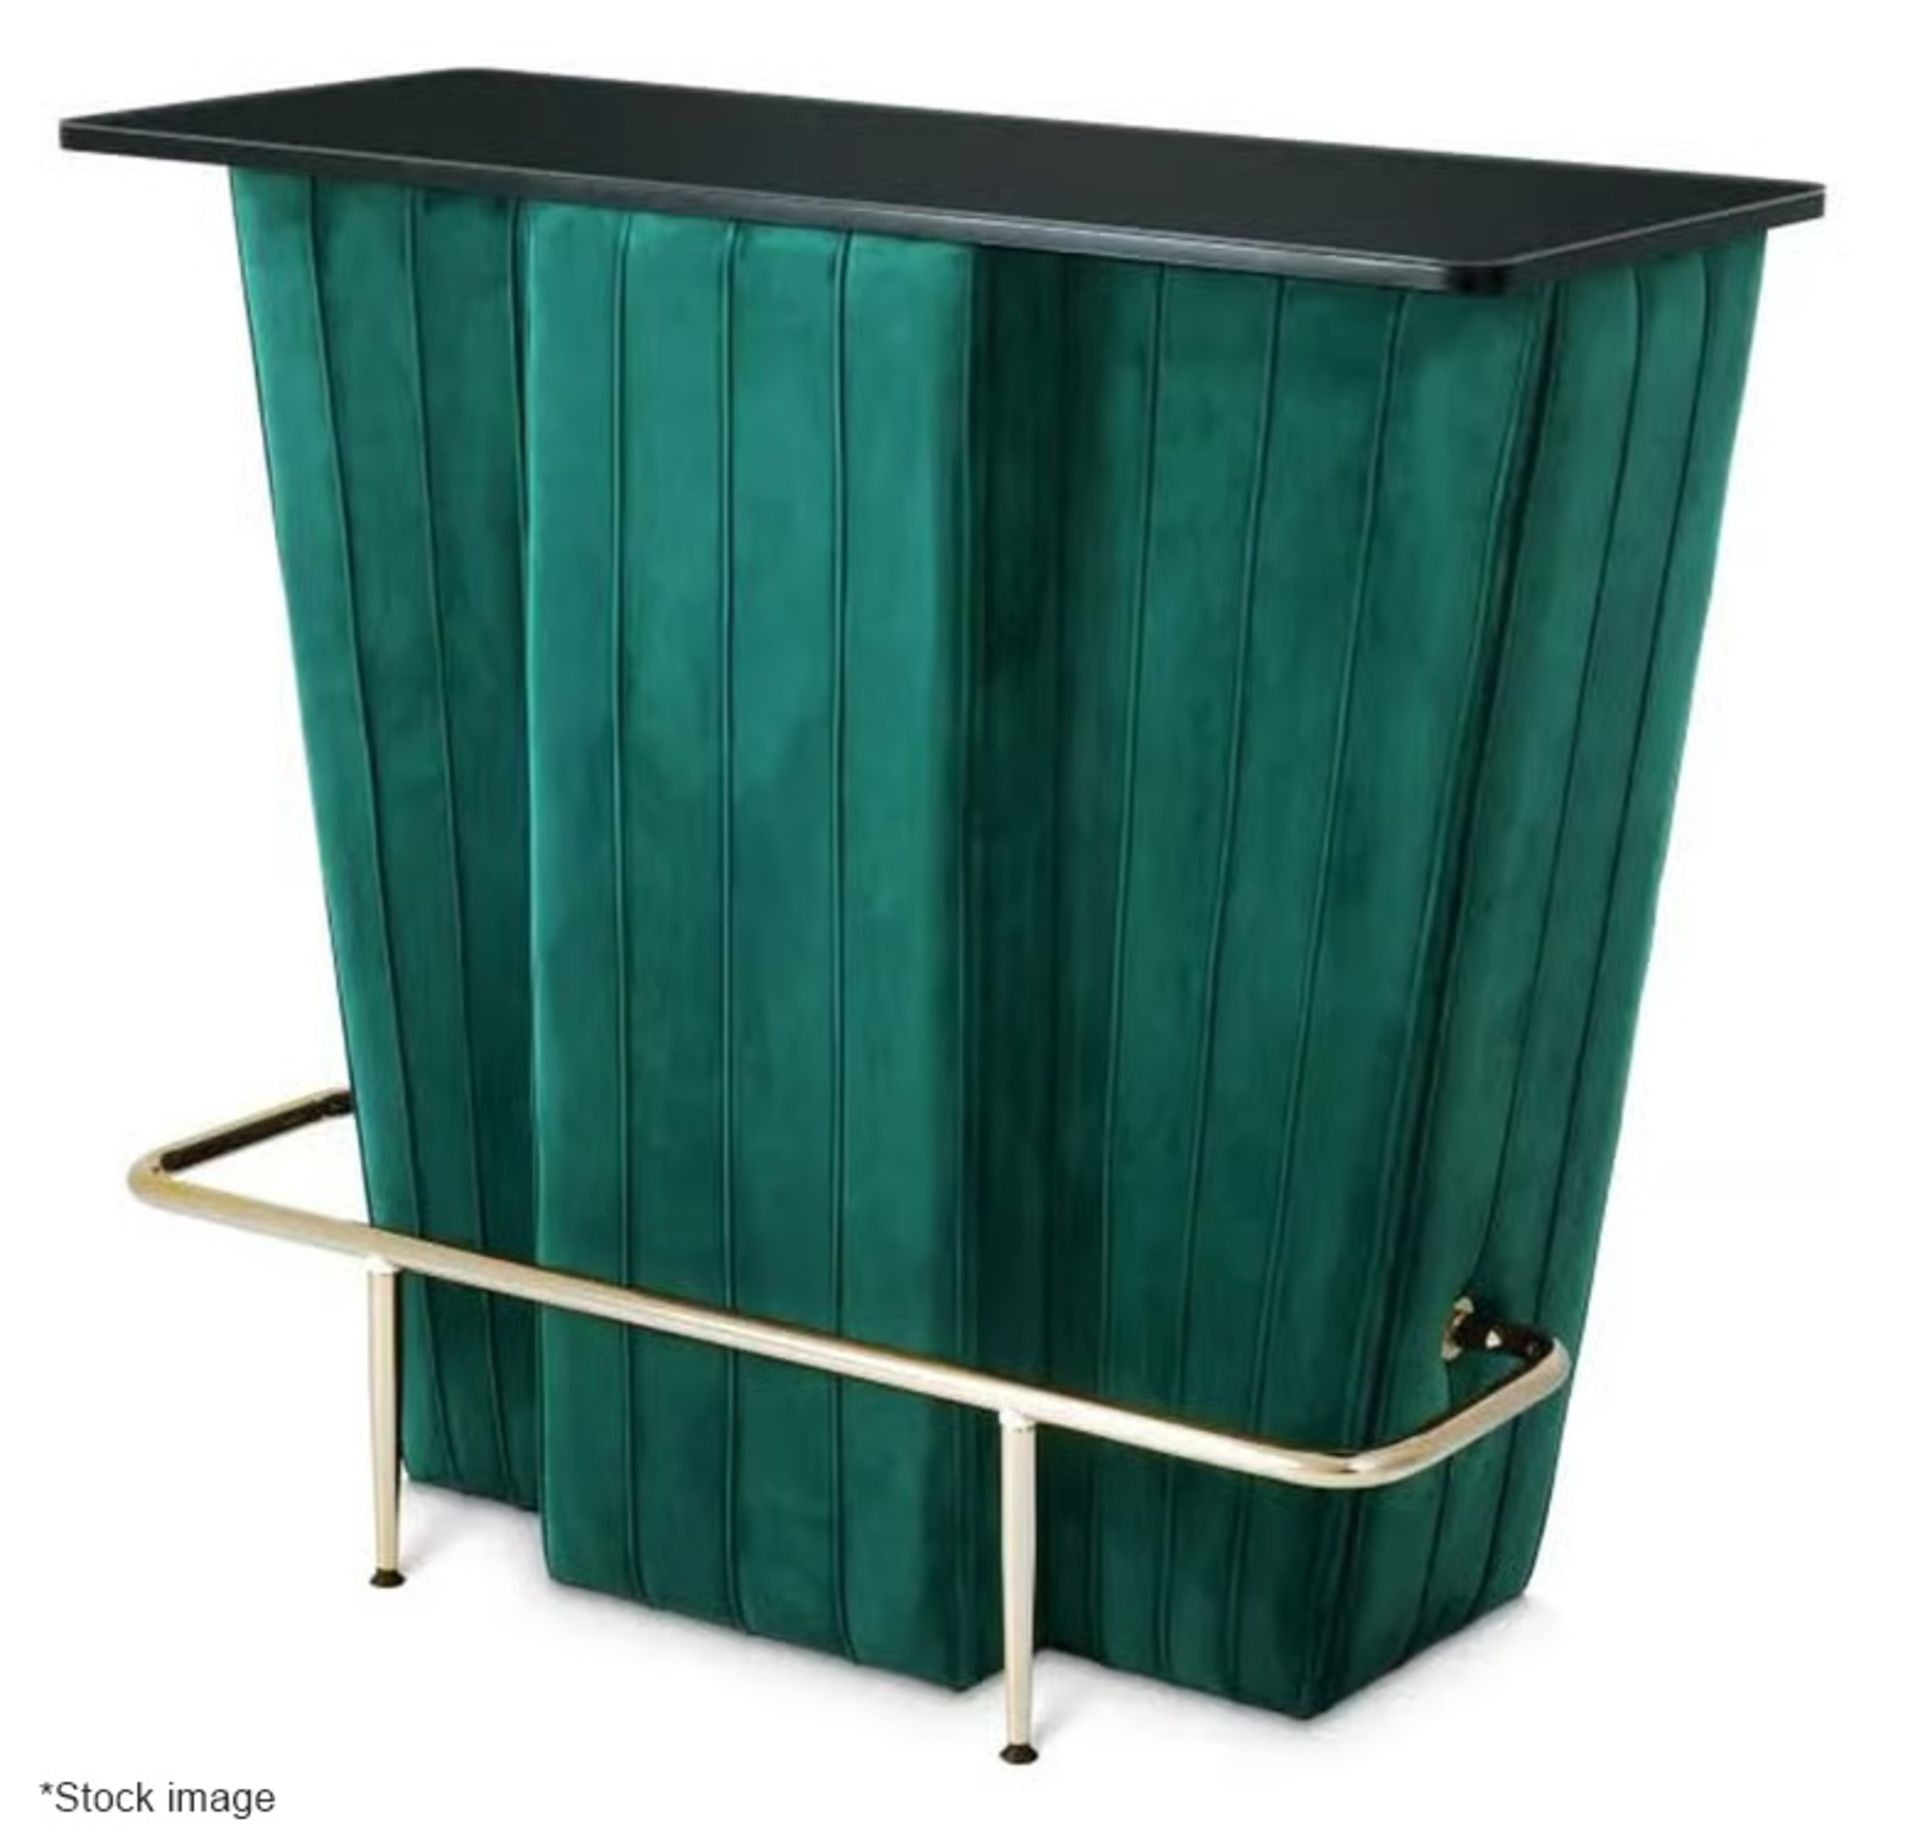 1 x EICHHOLTZ Bolton Bar Counter With A Green Velvet Frontage And Brass Foot Rail - RRP £1,980 - Image 6 of 11